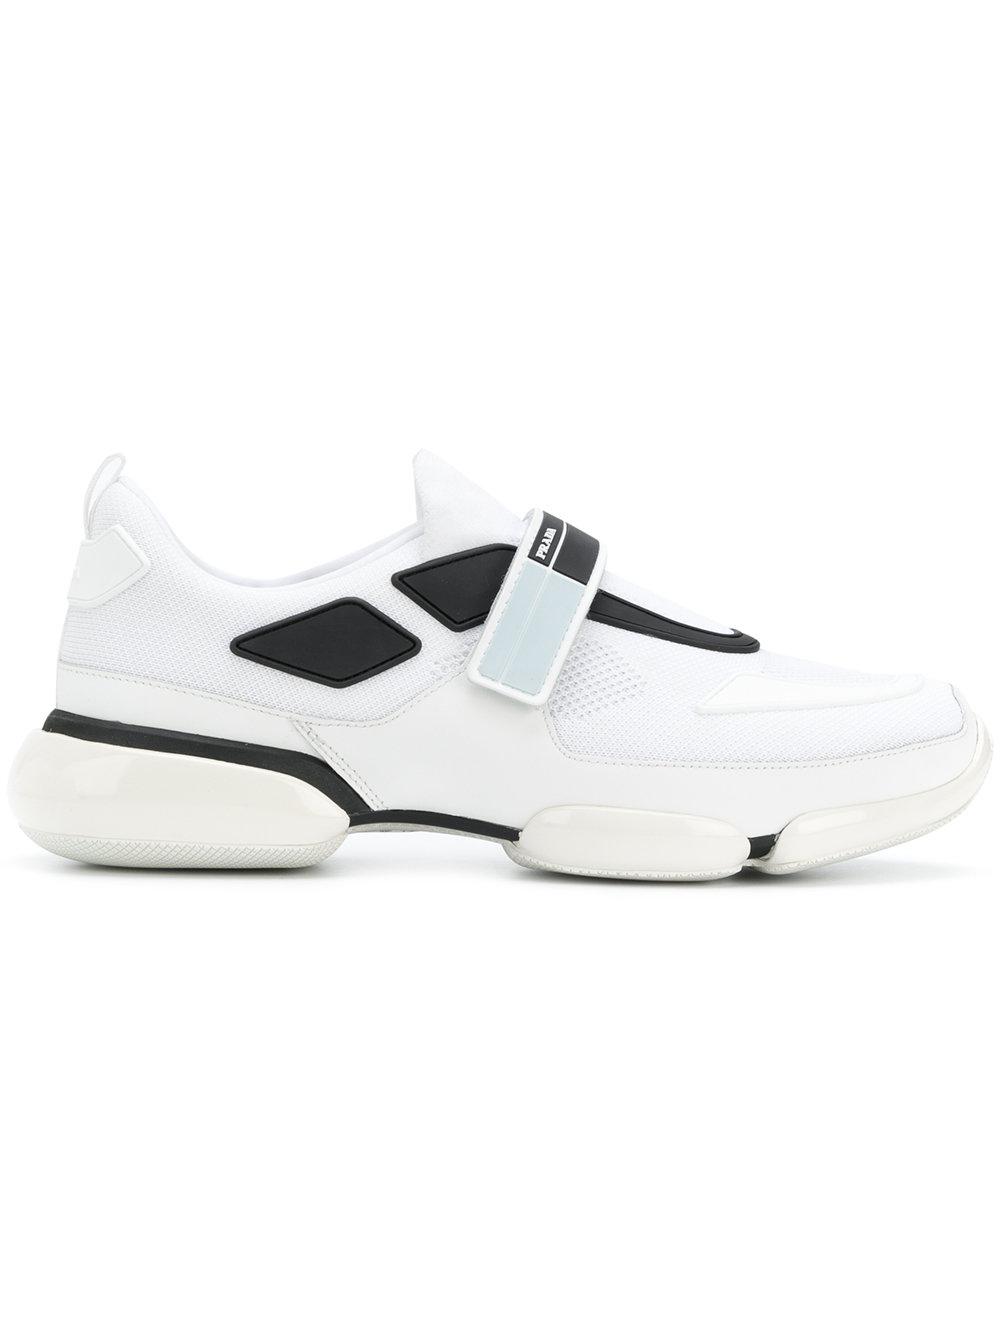 Prada Leather Cloudbust Sneakers in White for Men - Save 50% - Lyst